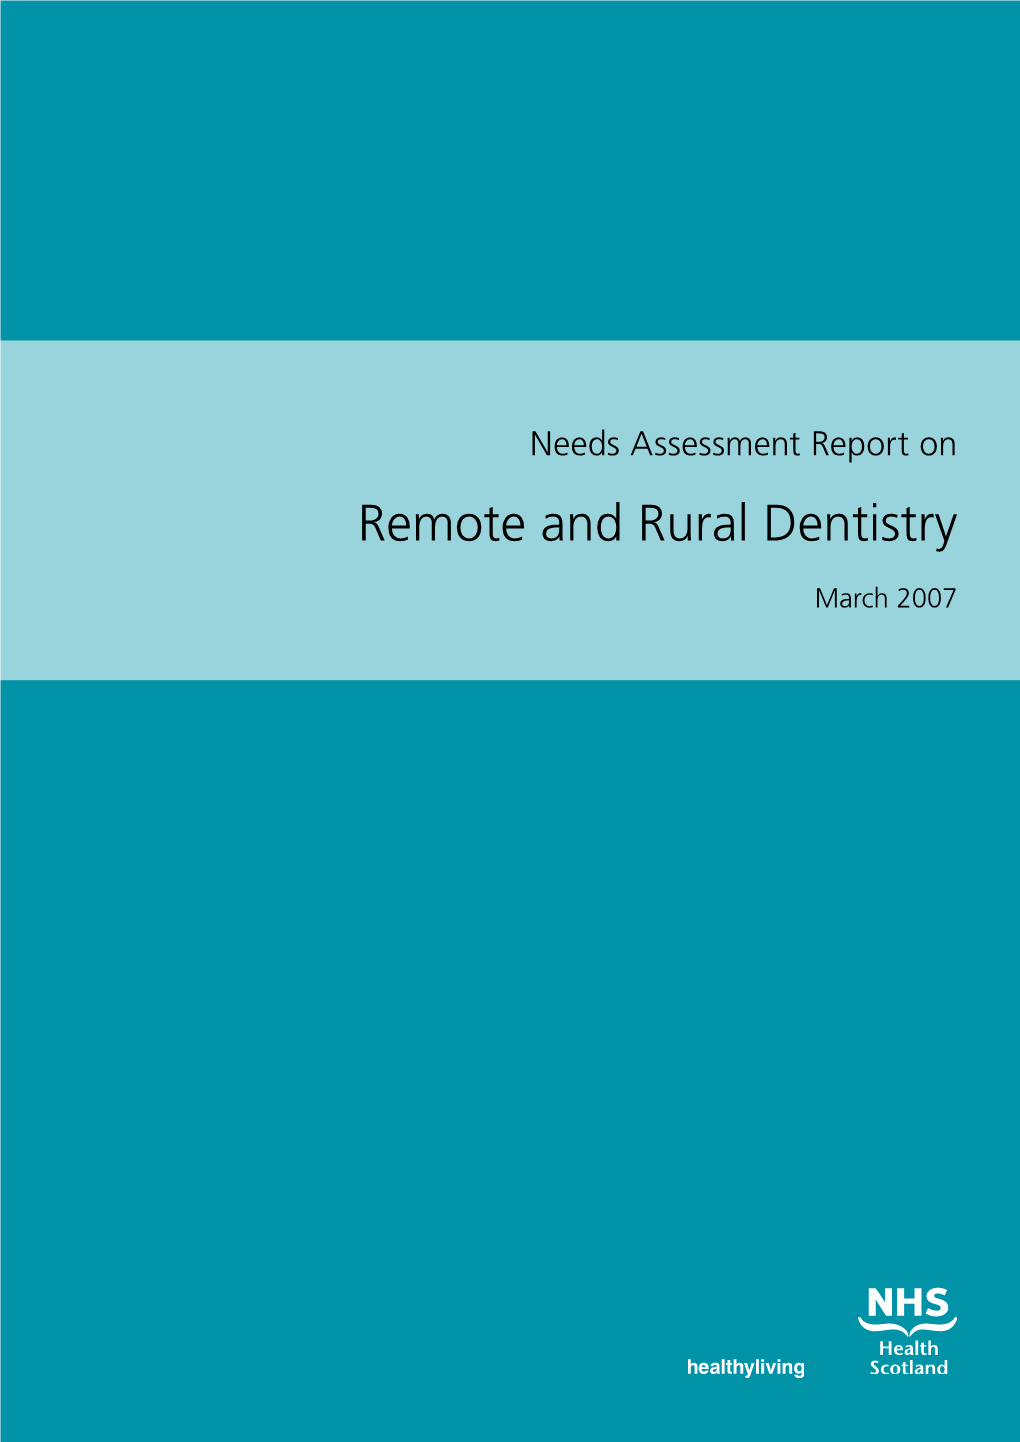 Remote and Rural Dentistry